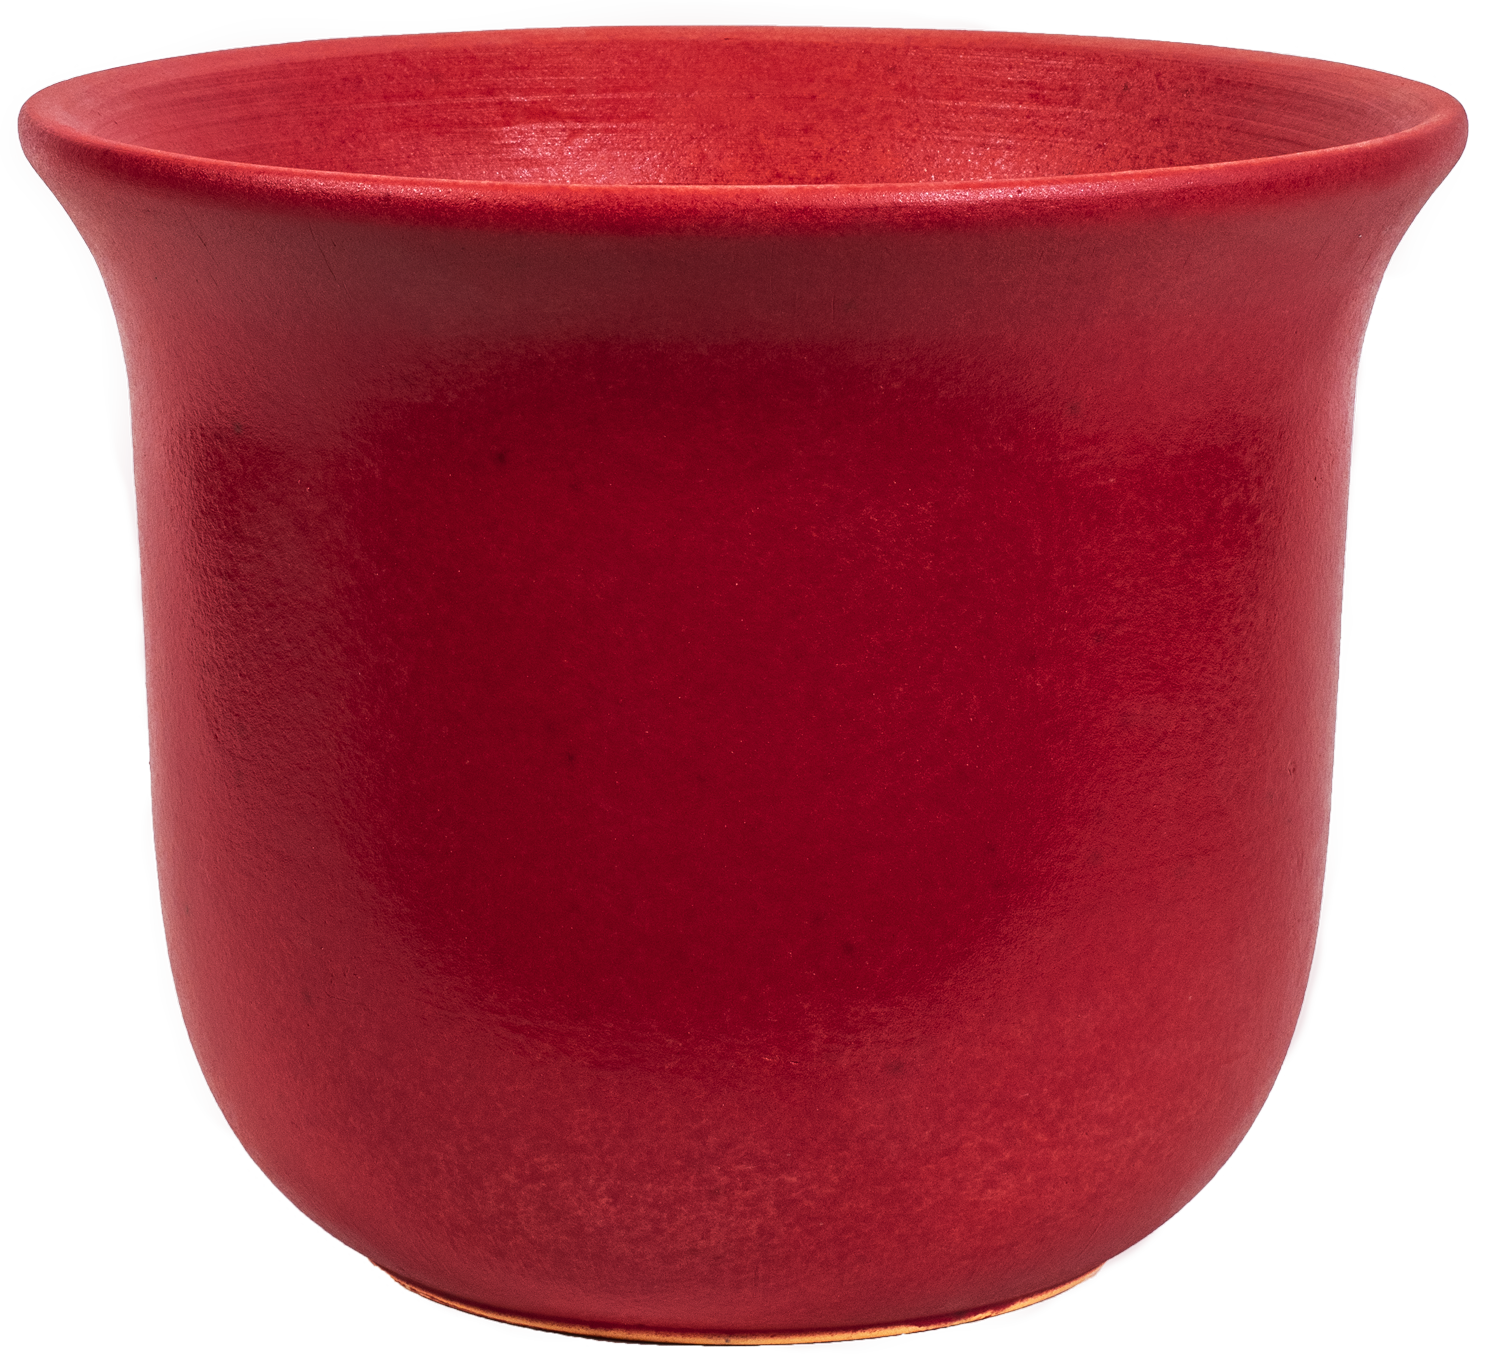 large ceramic red planter in a bell shape